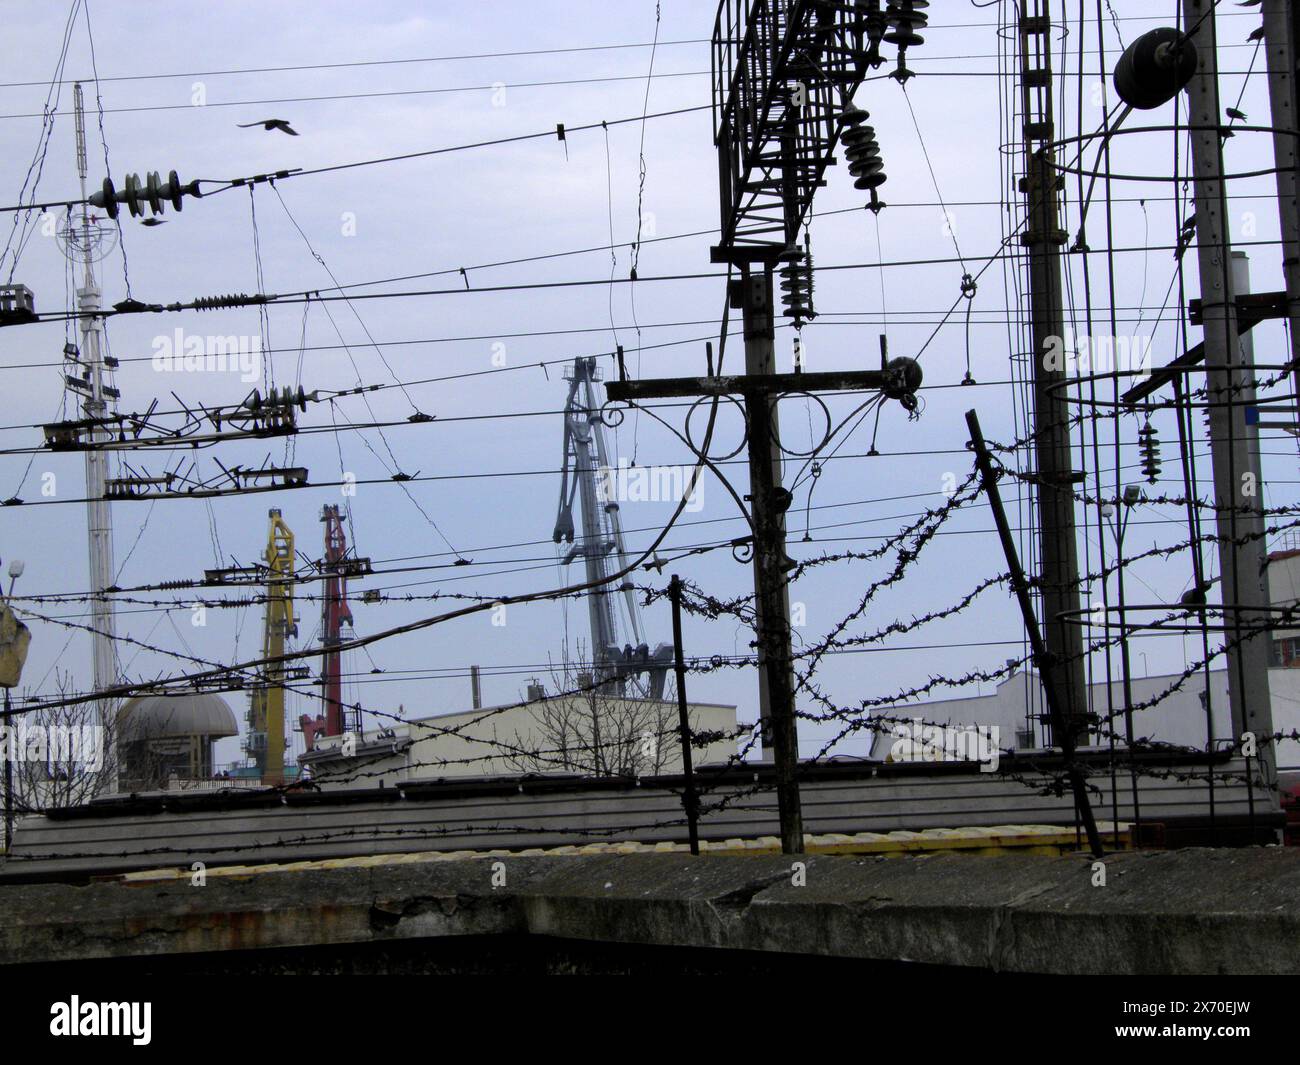 Photo of urban details. Electric poles and wires. In background is sky, buildings, construction cranes. Bird flies, barbed wire. Sky is overcast, gloo Stock Photo